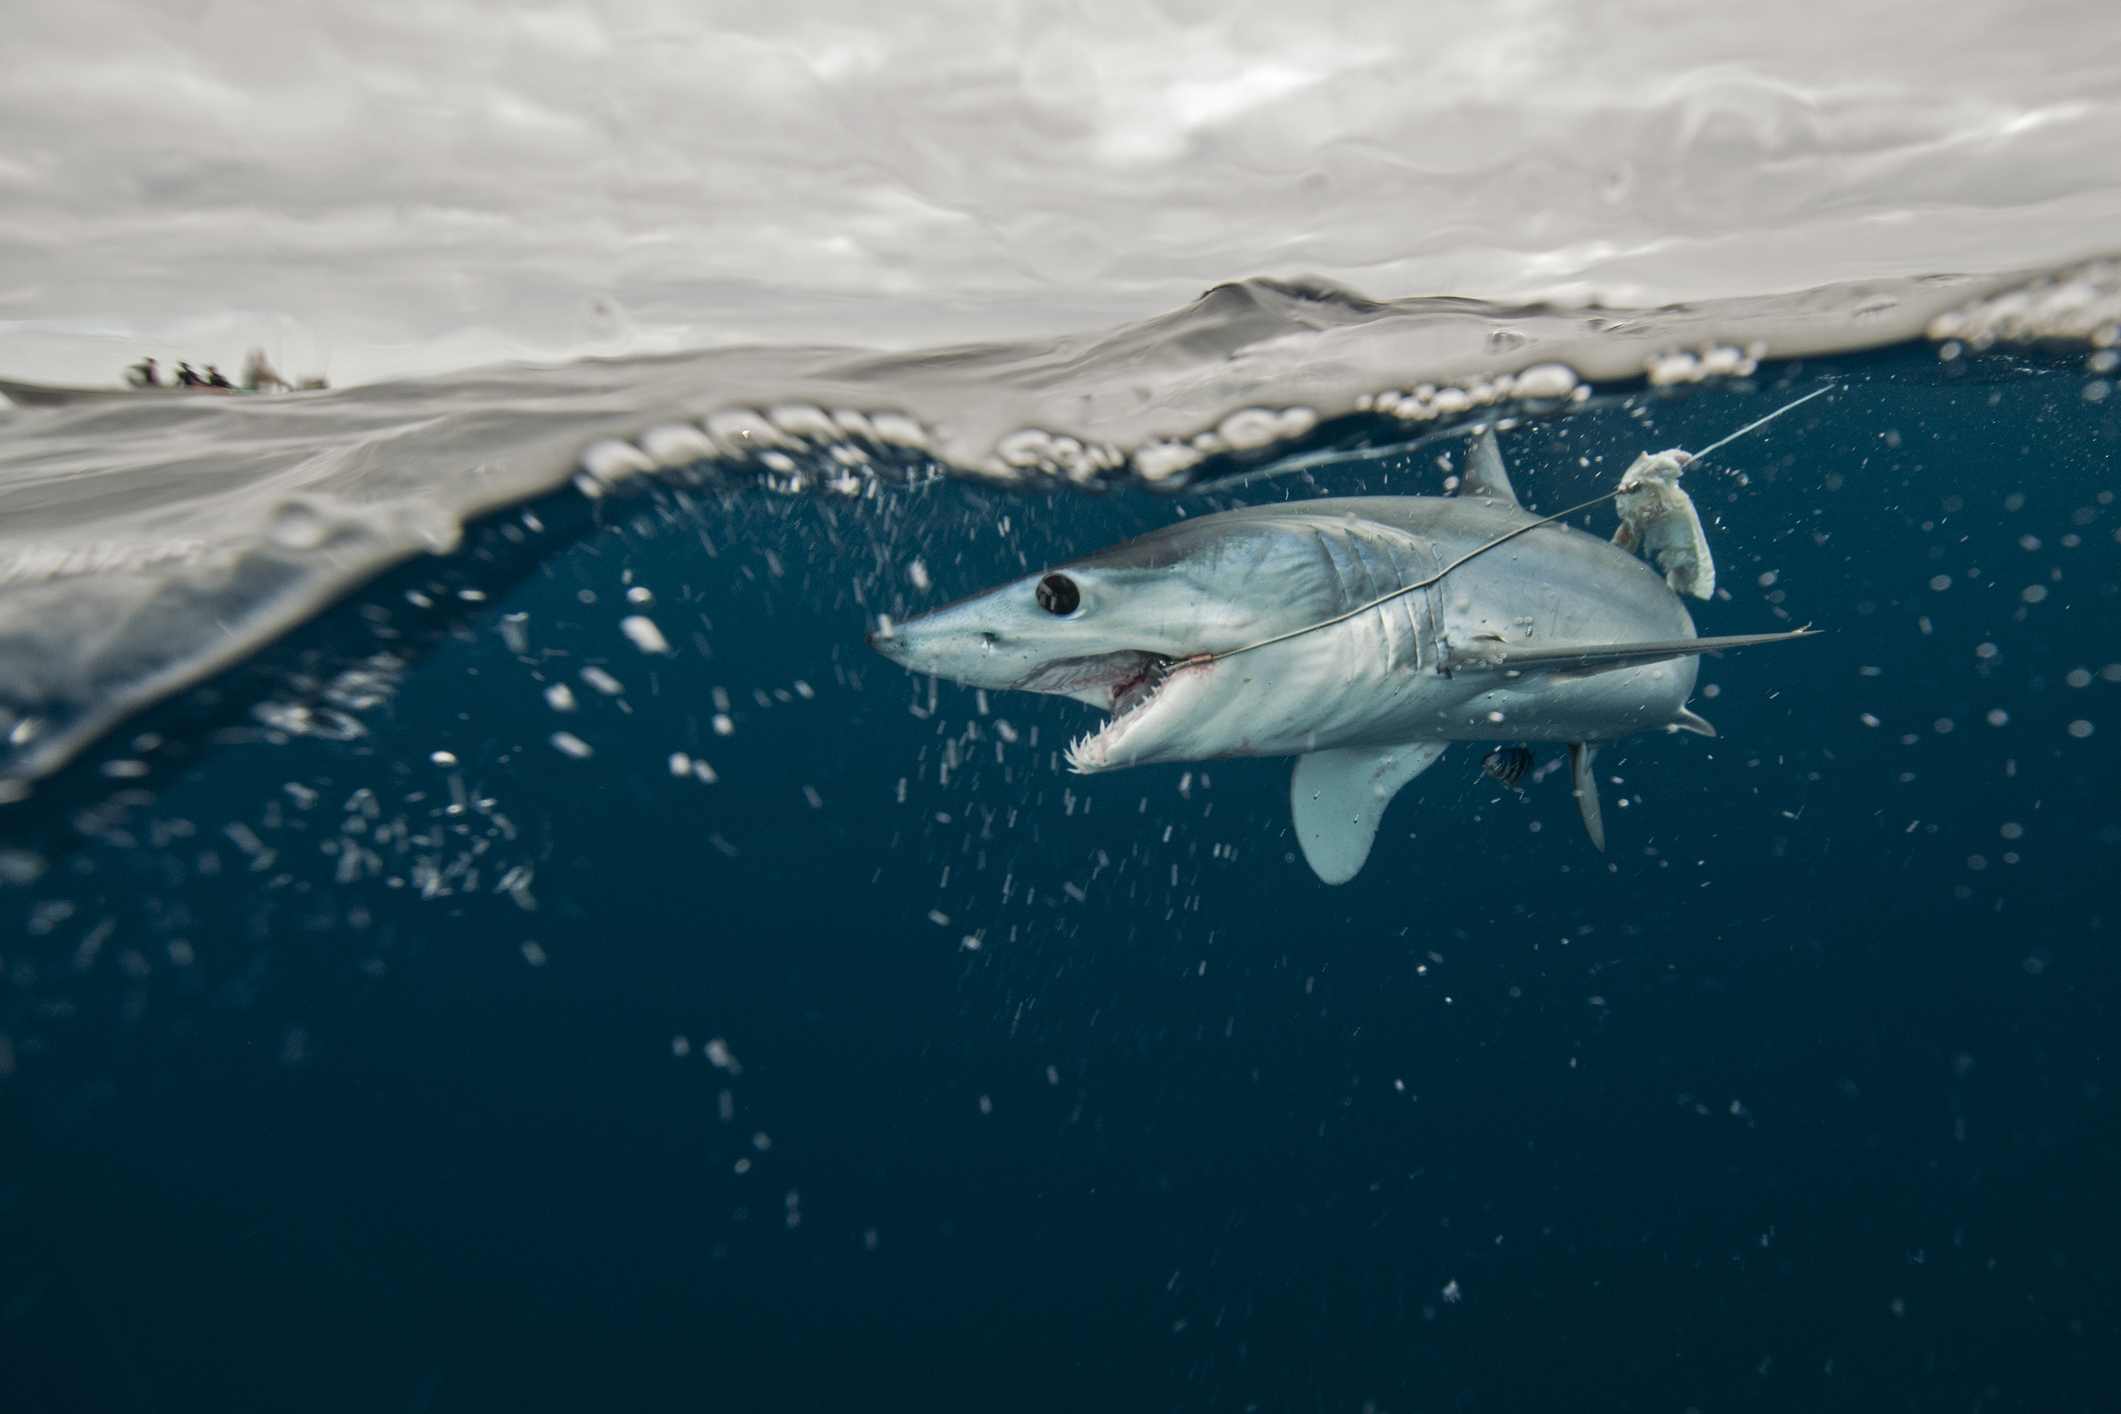 Federal Ban Ends Decades of Mako Shark Fishing Fever in the Northeast